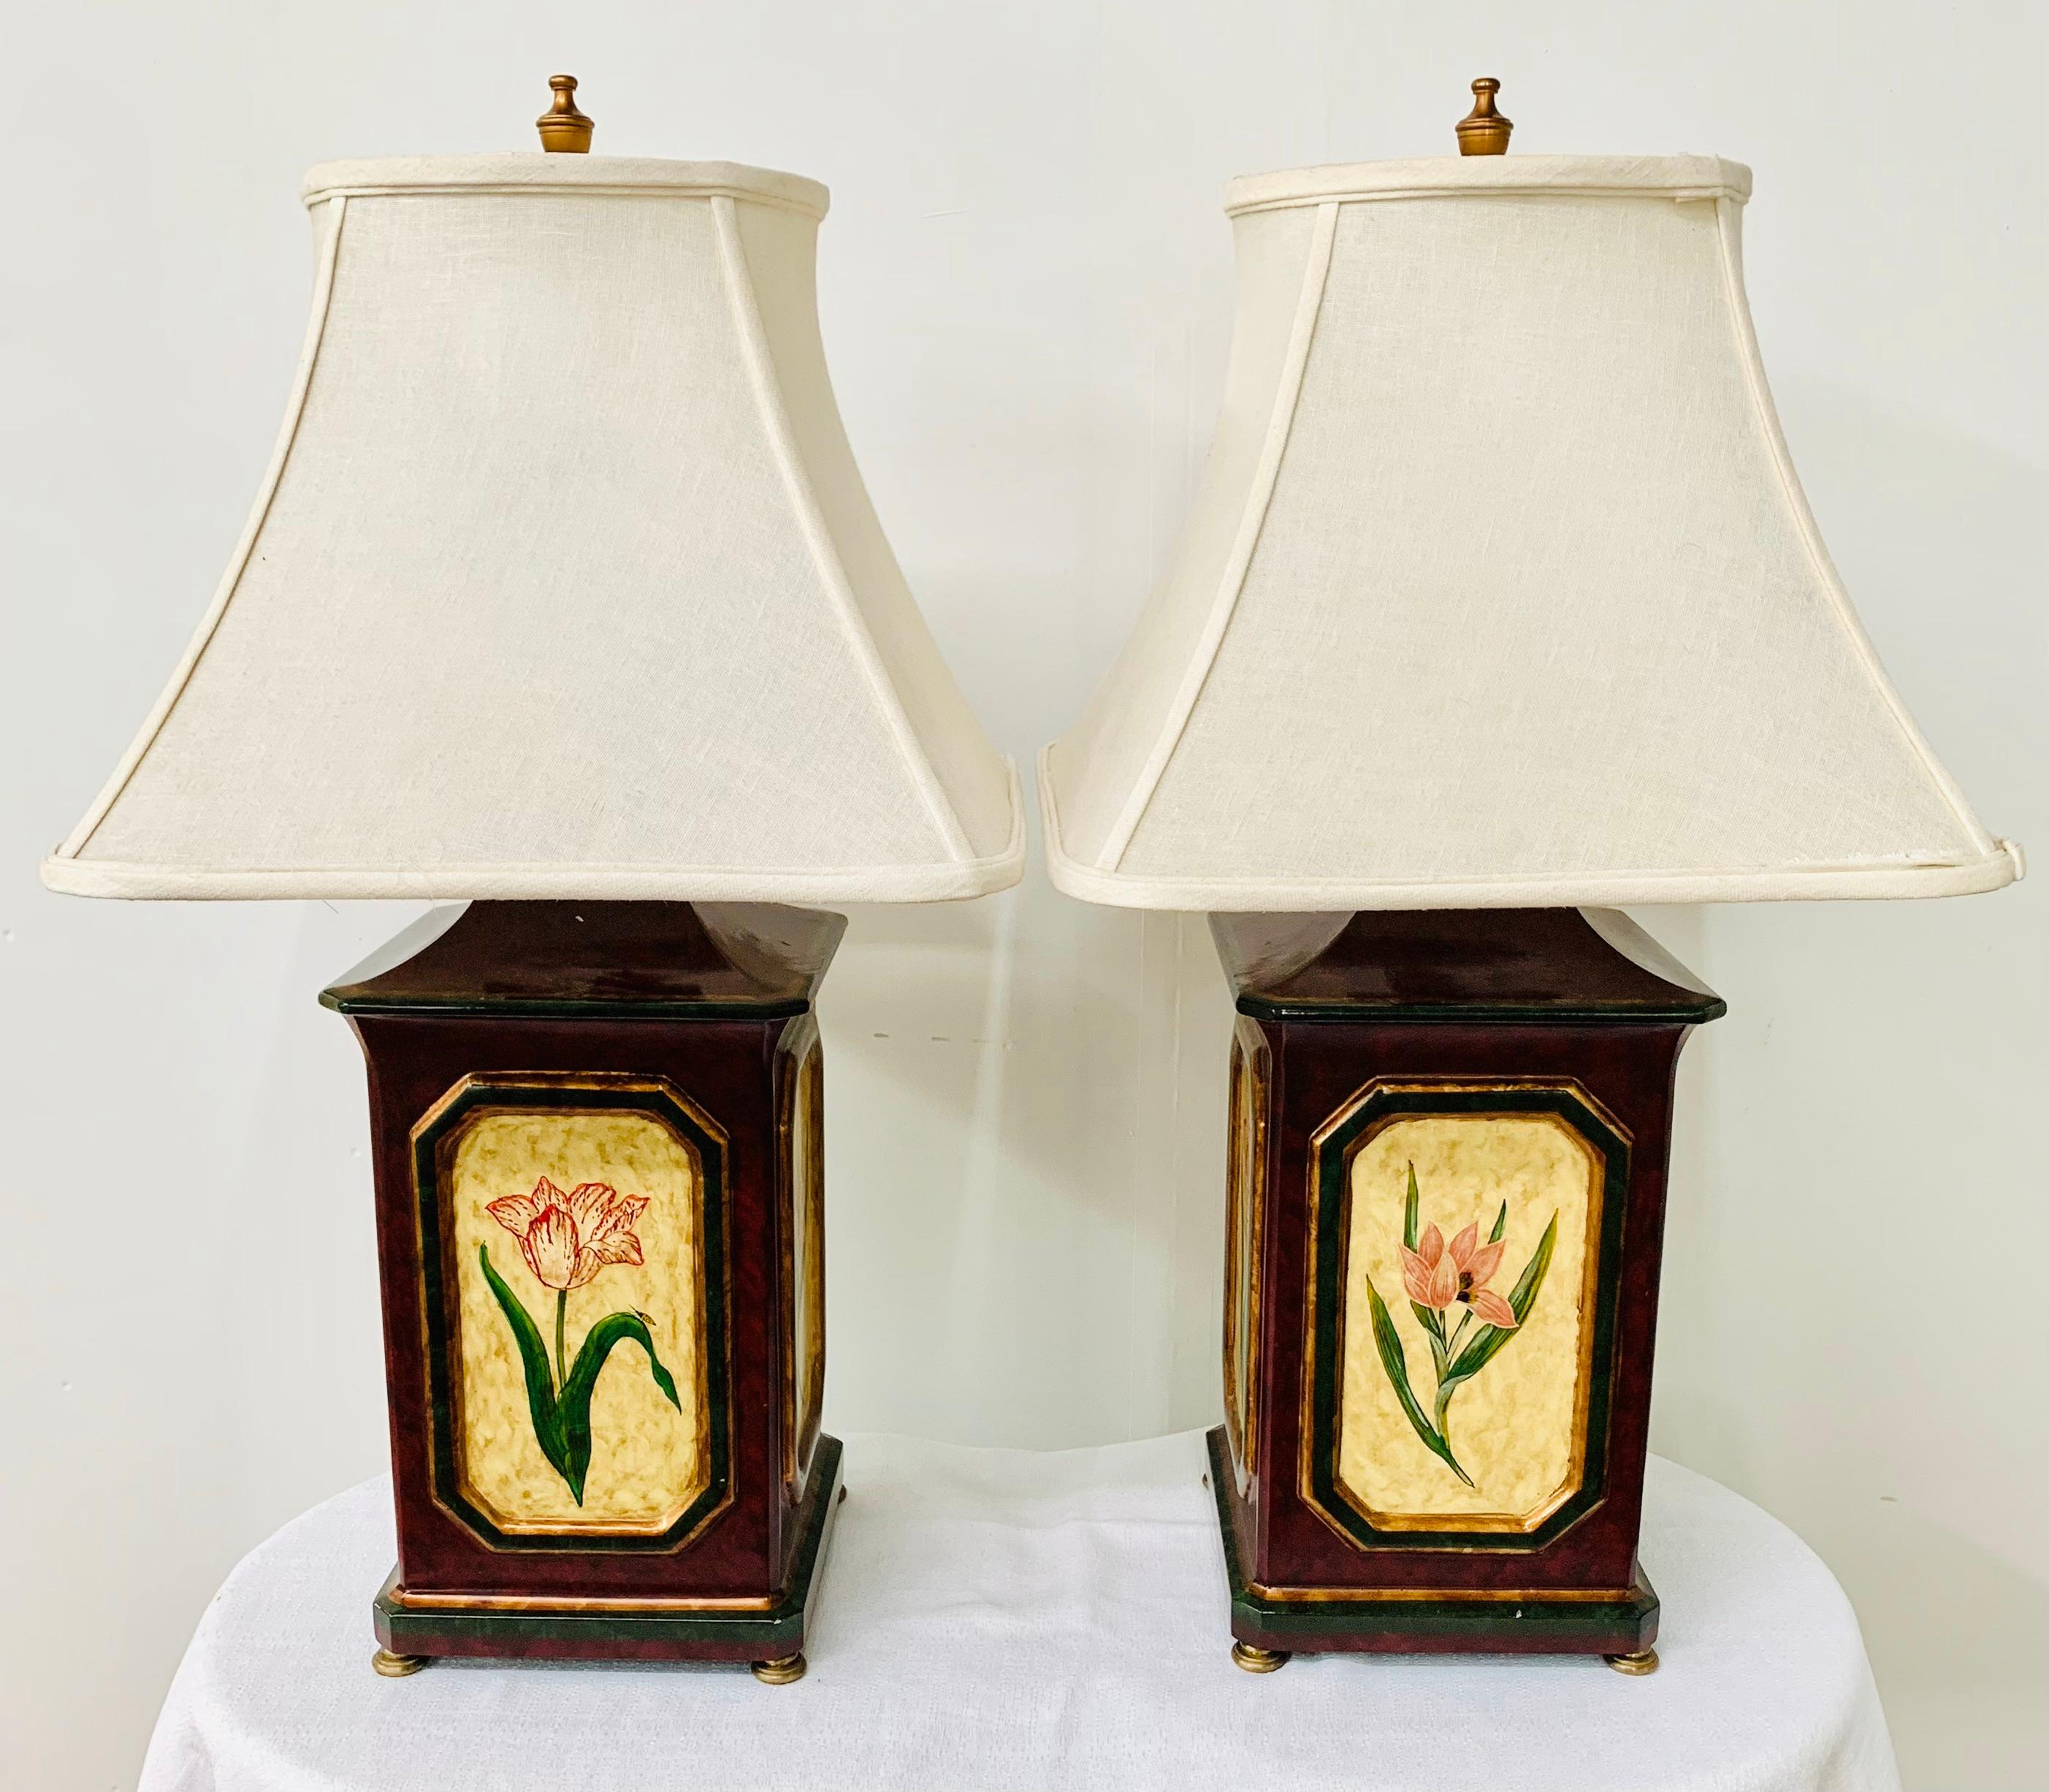 This elegant pair of Oriental hand-painted wooden table lamps features a fine floral design hand painted on the four sides of the lamp base. The pair is a classical and stylish addition to your living room. Bedroom or office space.
The lamps come